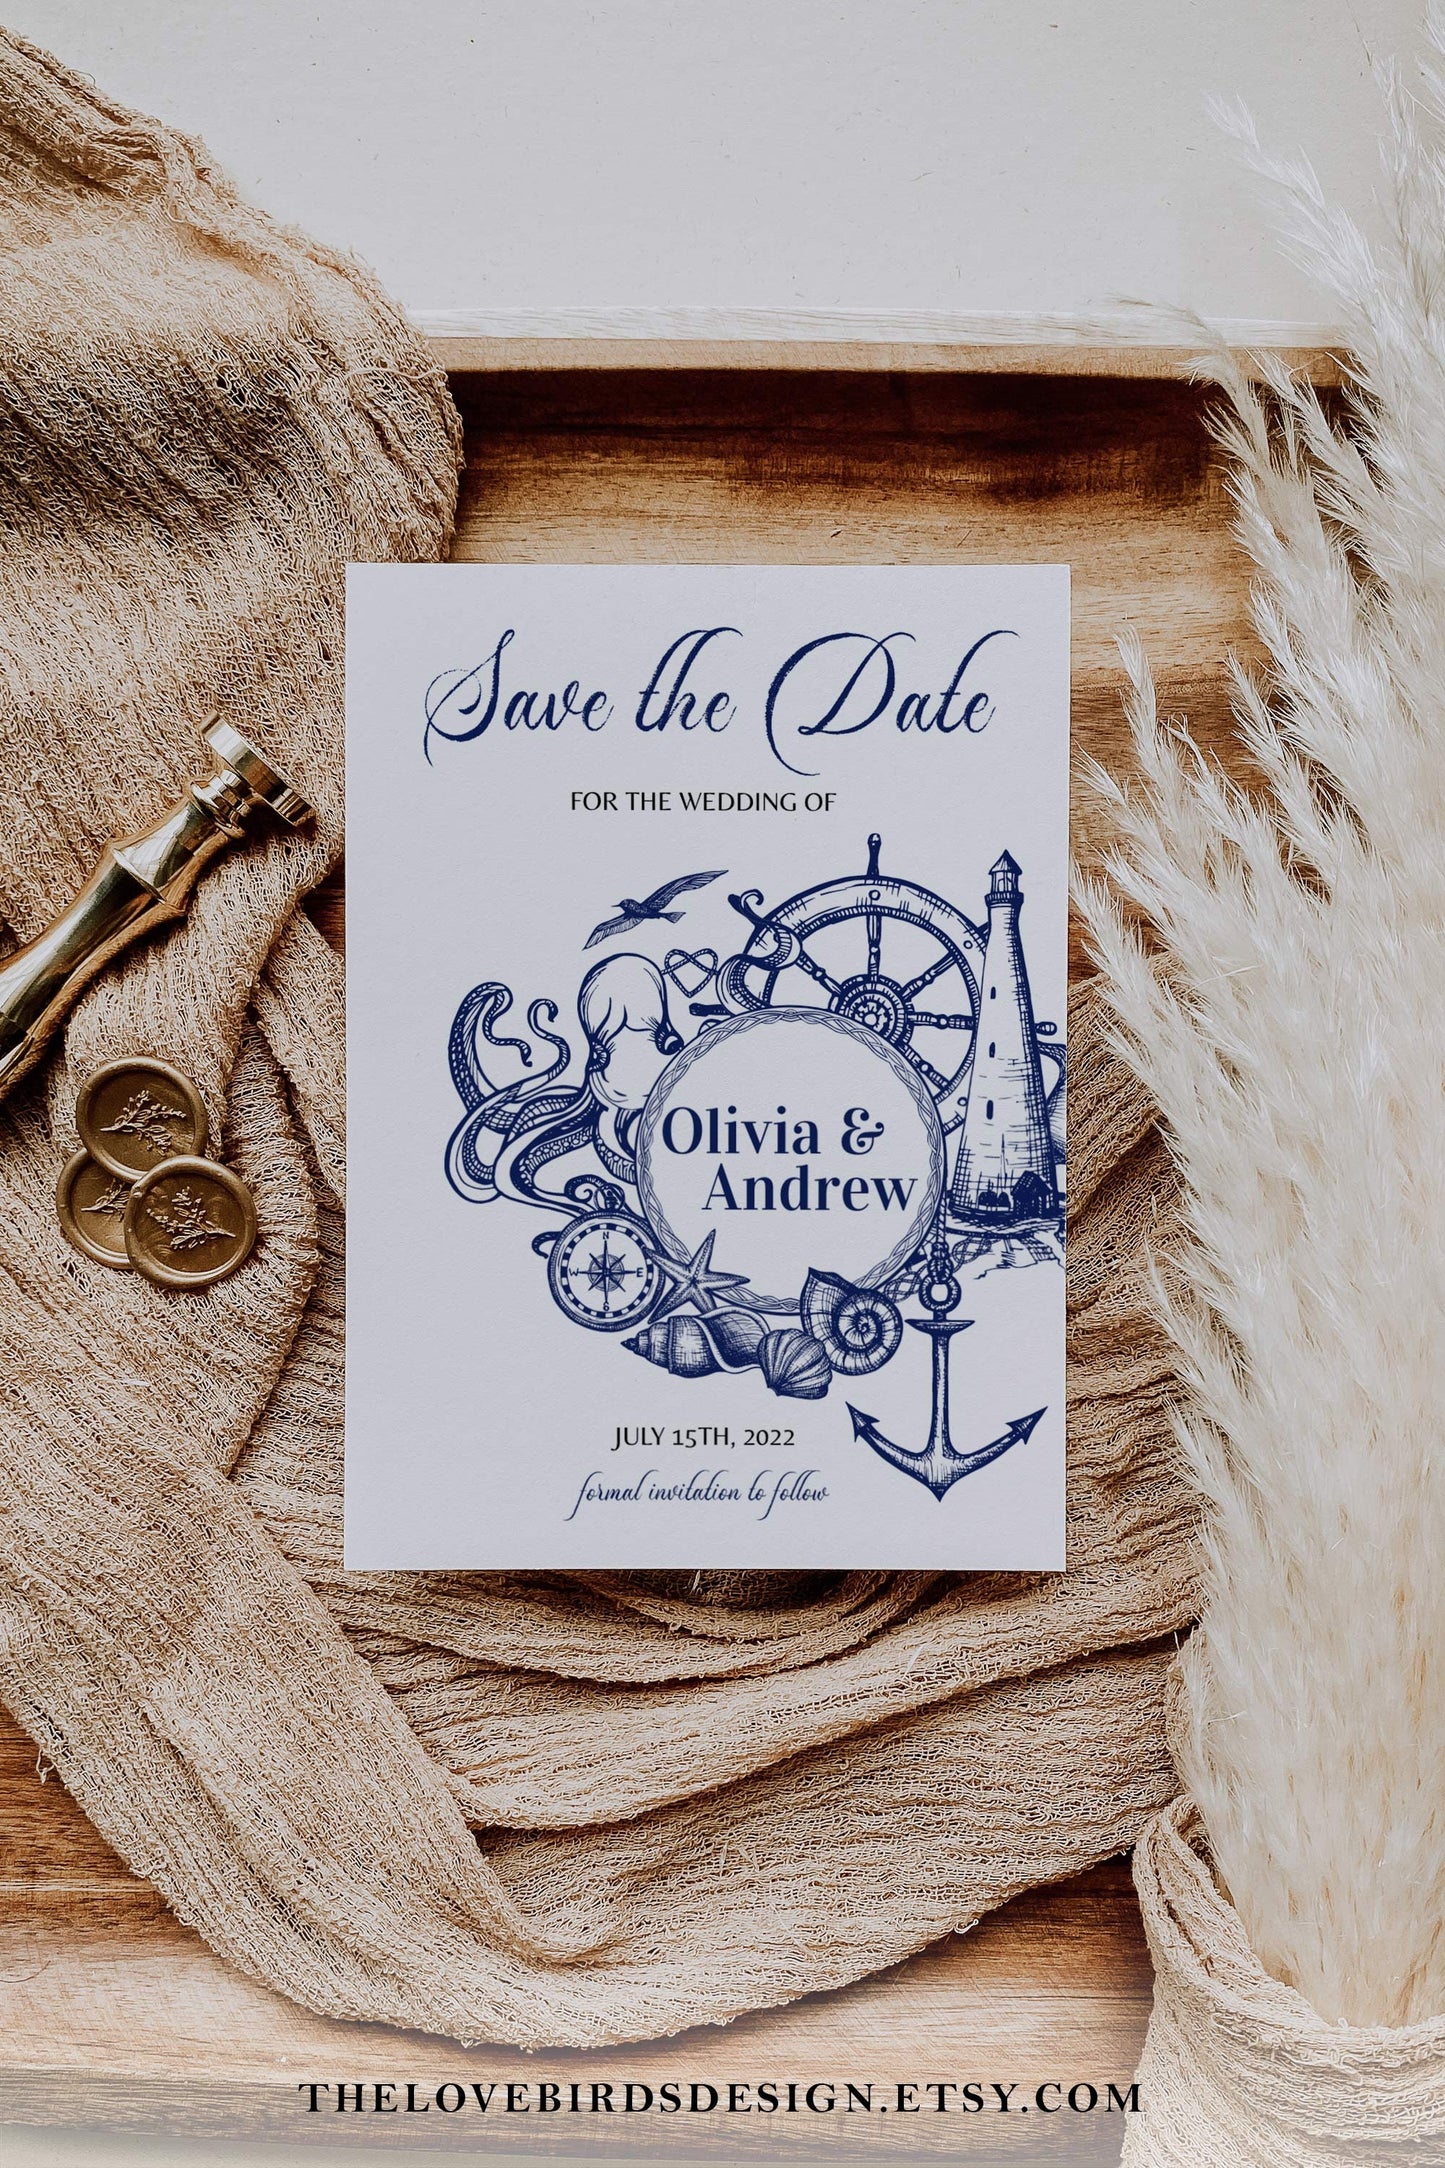 Nautical Save the Date Wedding Invitation Template, Wedding Invite with Photo for Ocean Beach Wedding | Printable Template